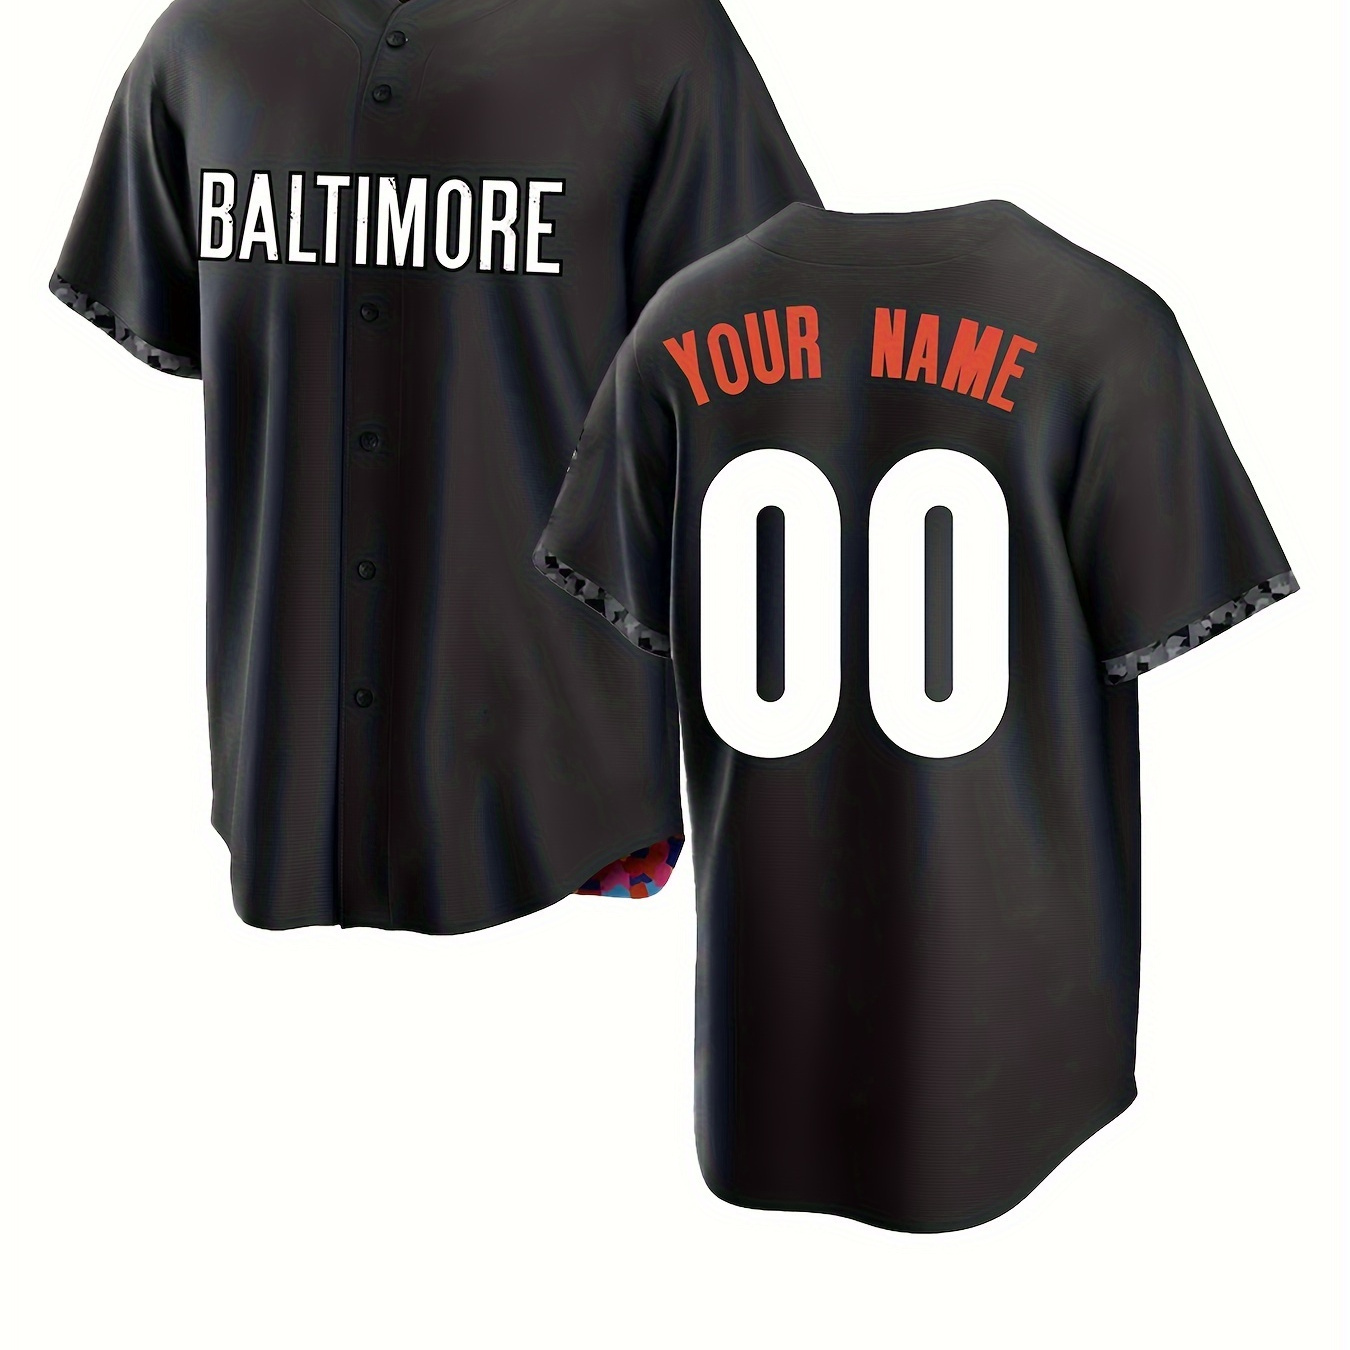 

Customizable Name And Number Embroidered Leisure Sports Customization Men's Baseball Jersey